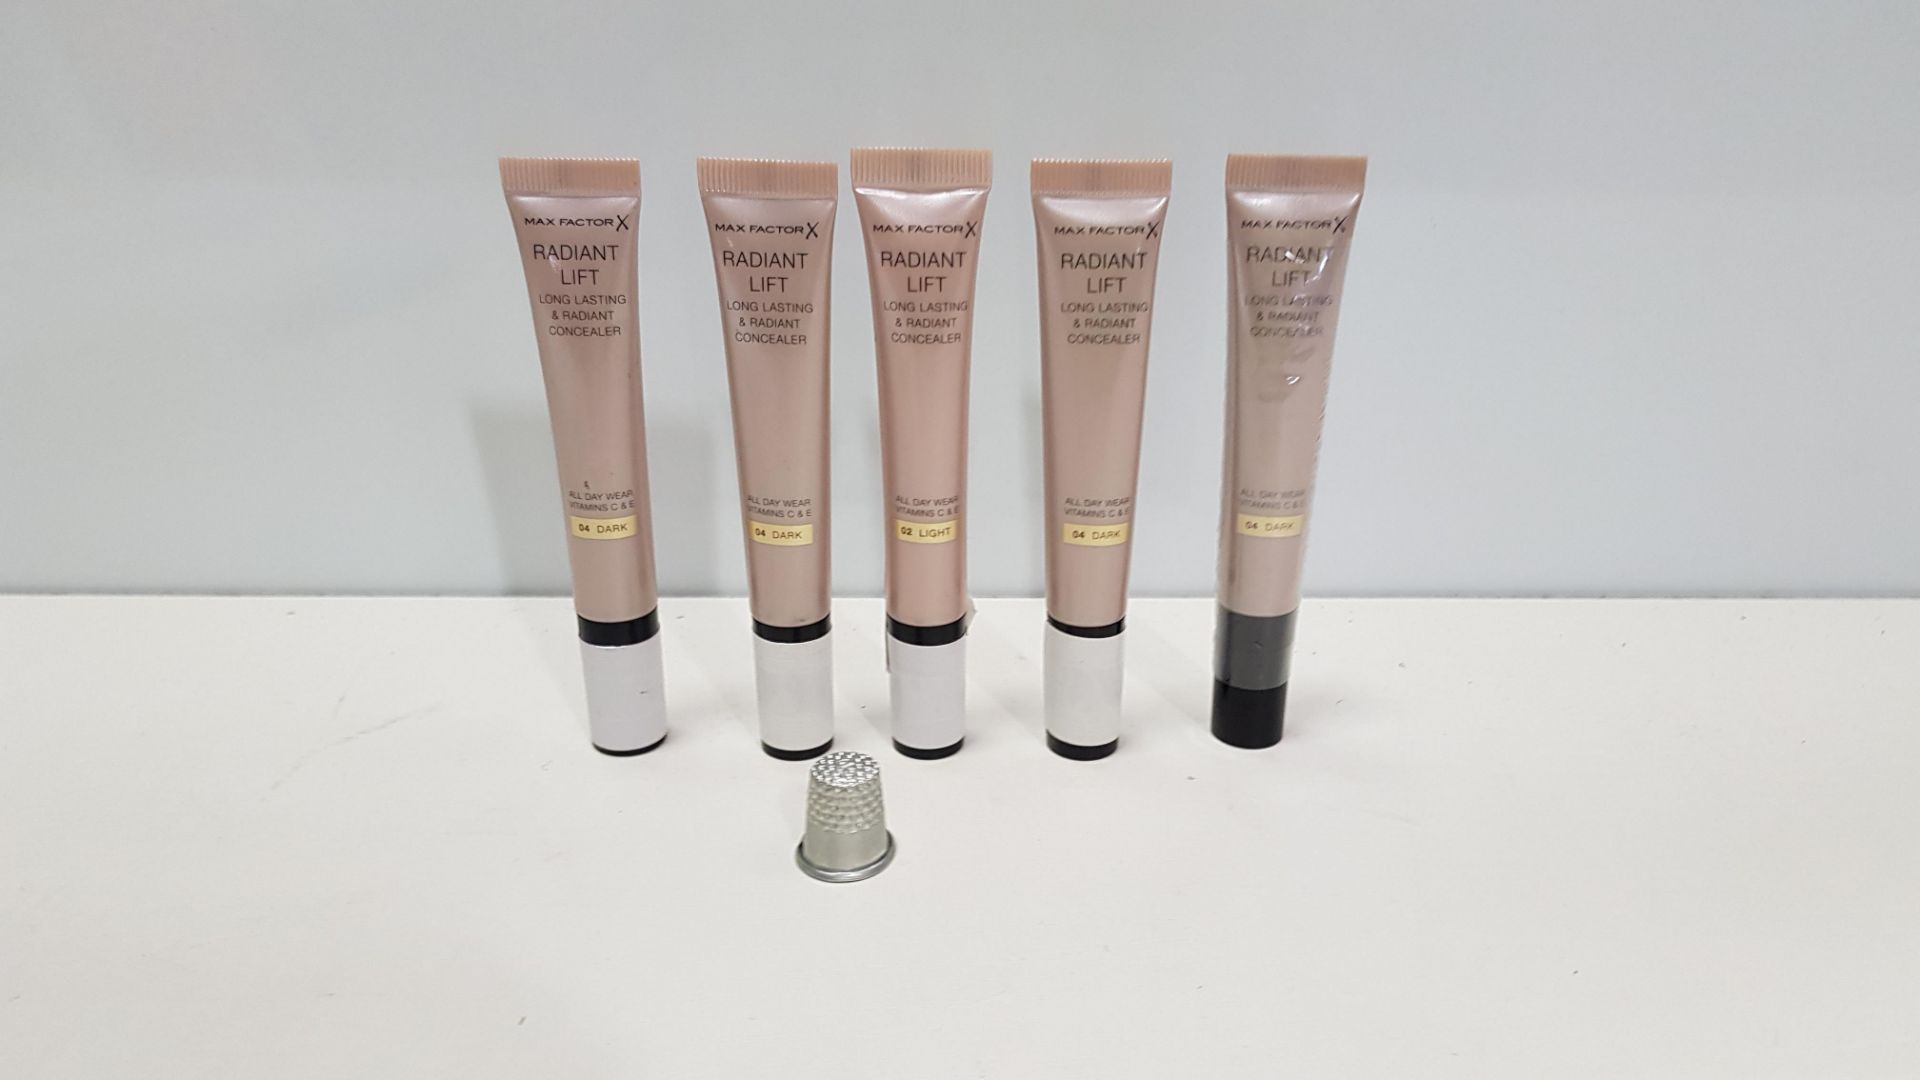 100 X BRAND NEW MAX FACTOR X RADIANT LIFT LONG LASTING & RADIANT CONCEALER ALL DAY WEAR VITAMINS C &